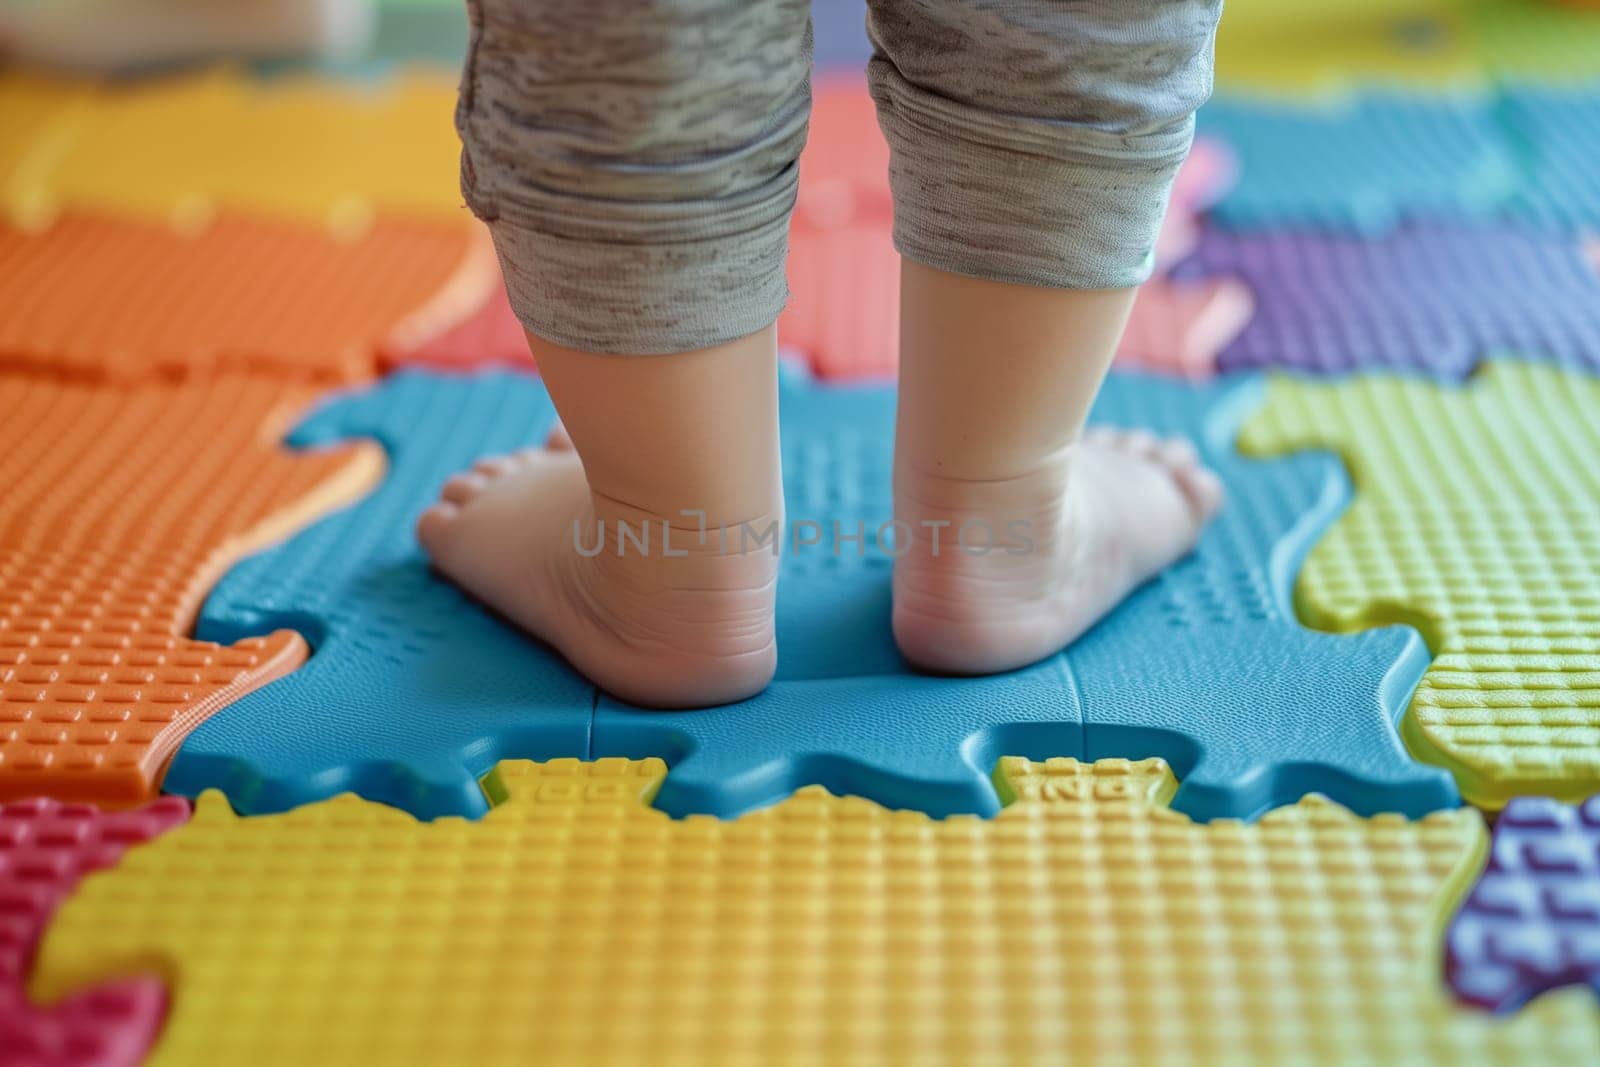 A close-up view of a childs bare feet standing on a vibrant puzzle mat with interlocking colorful pieces, creating a playful and educational setting.